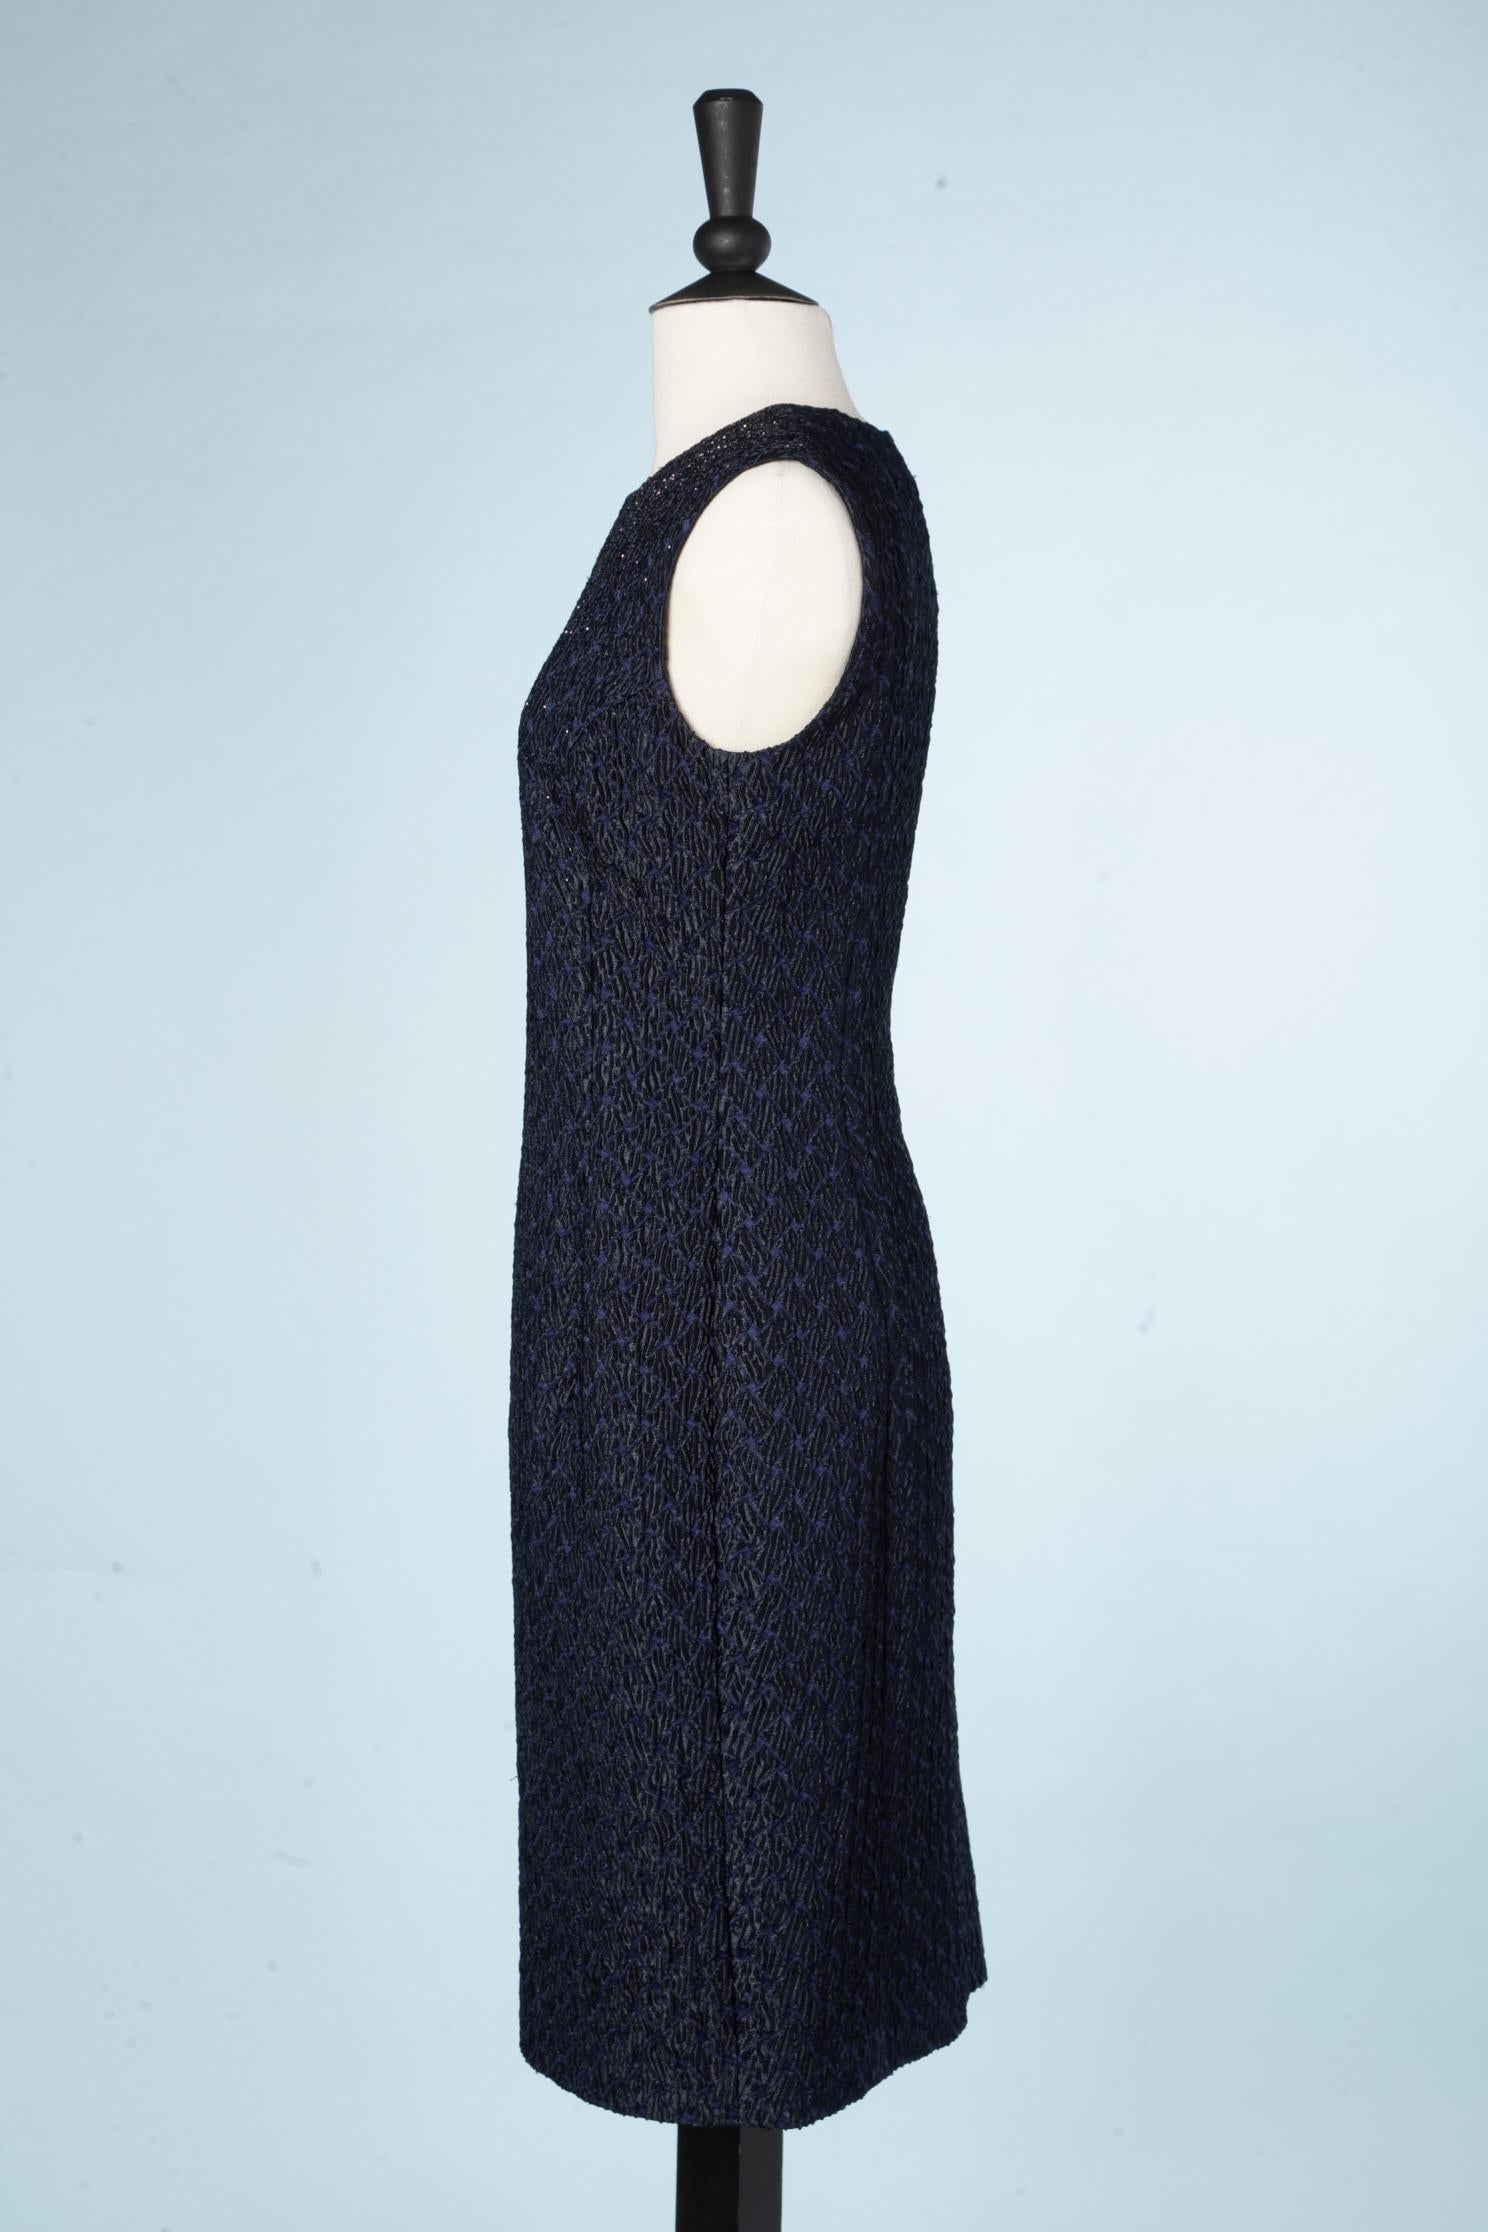 Sleeveless cocktail dress in navy and black jacquard with embroidery Nina Ricci  In Excellent Condition For Sale In Saint-Ouen-Sur-Seine, FR